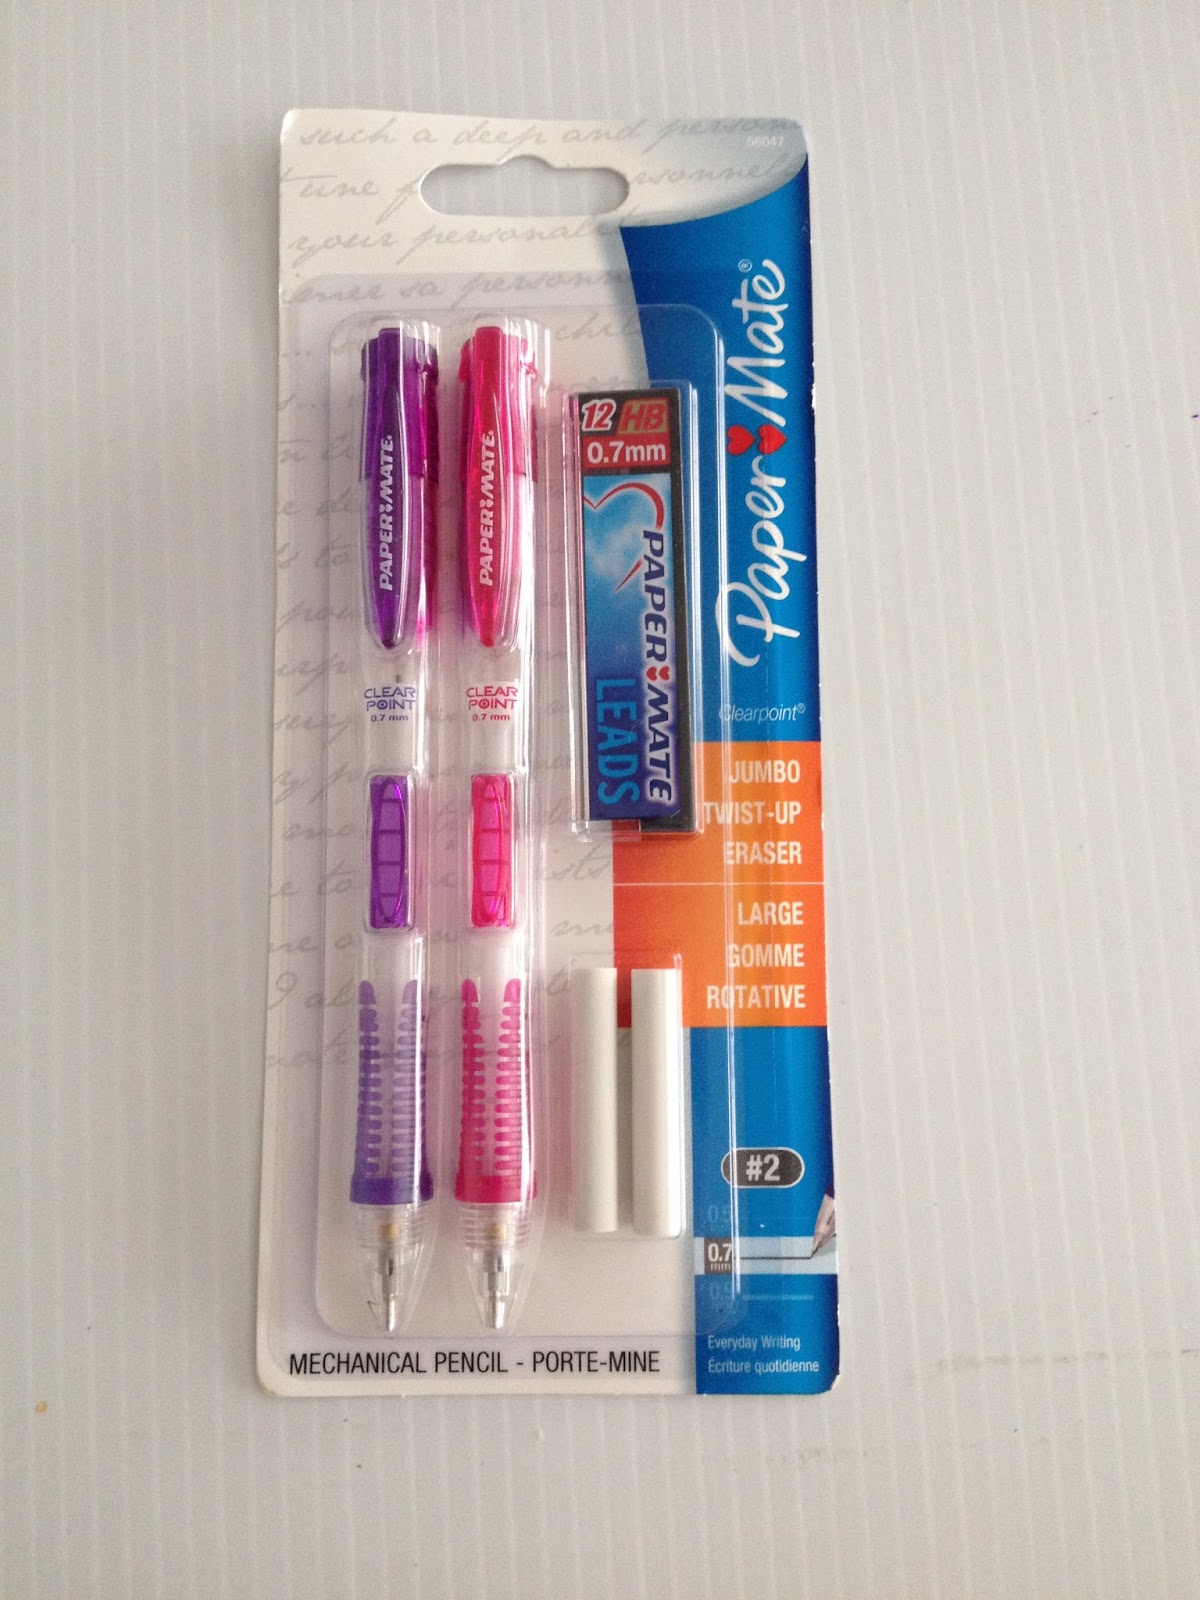 From The Archives: PaperMate Inkjoy 0.7mm 14-Color Set - The Well